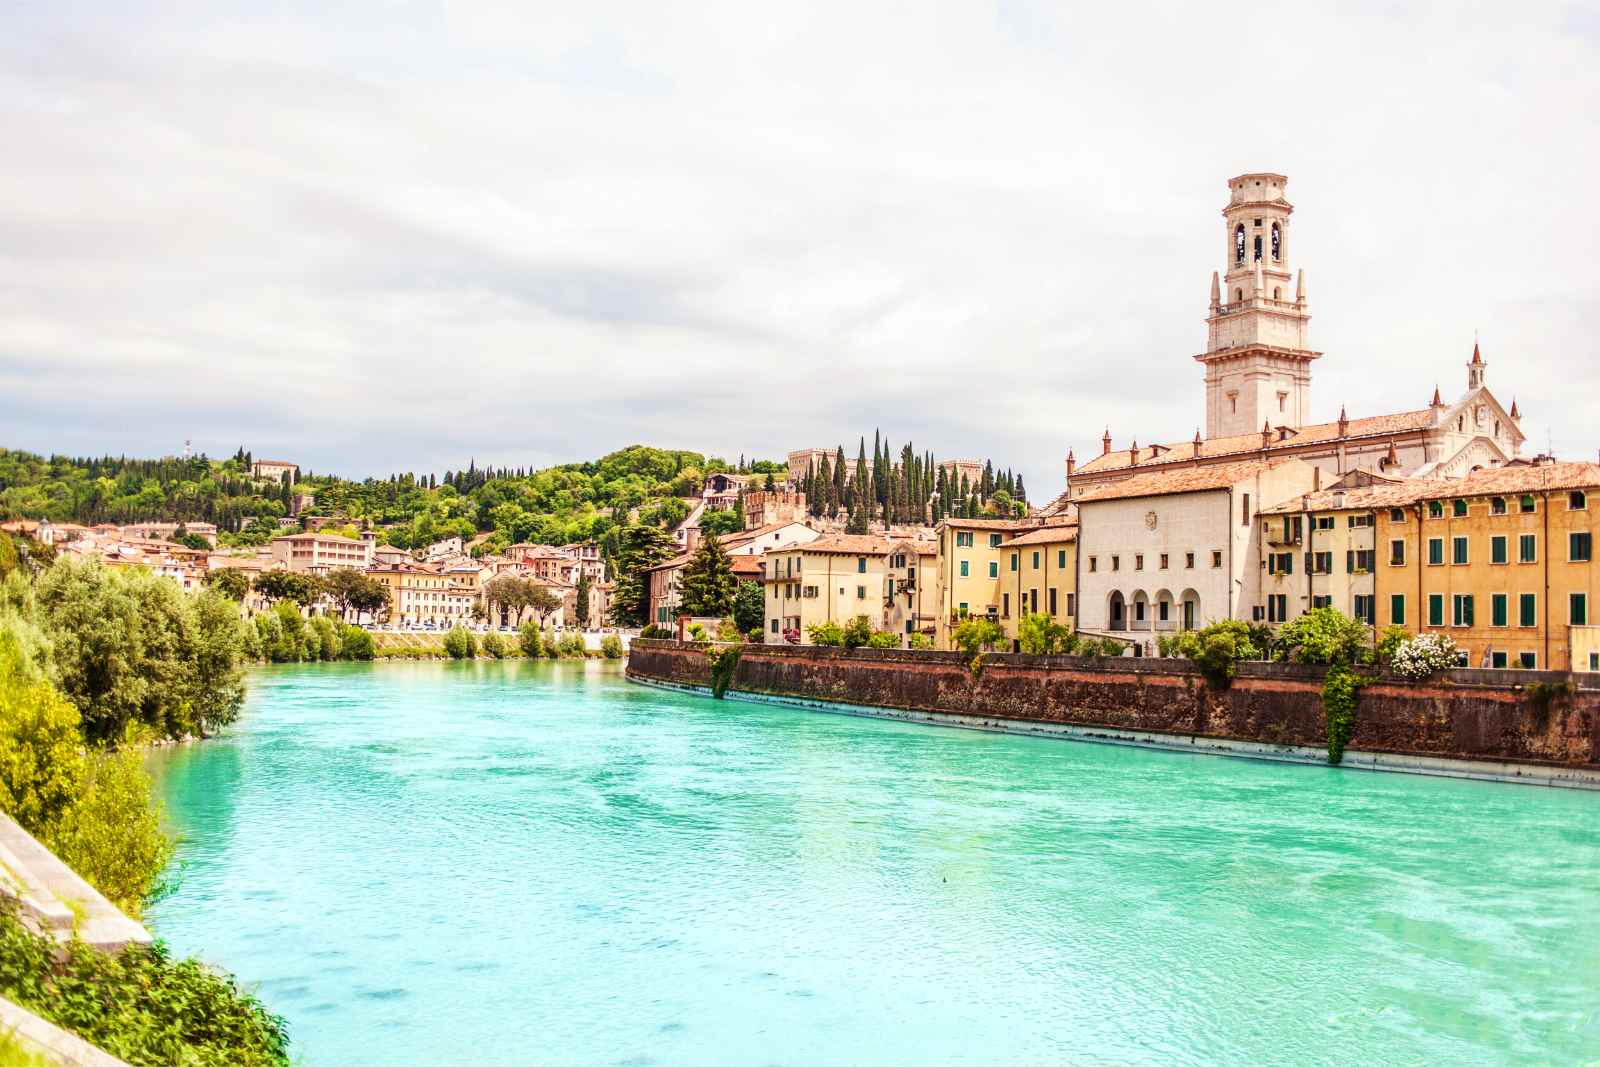 Top things to do in Verona